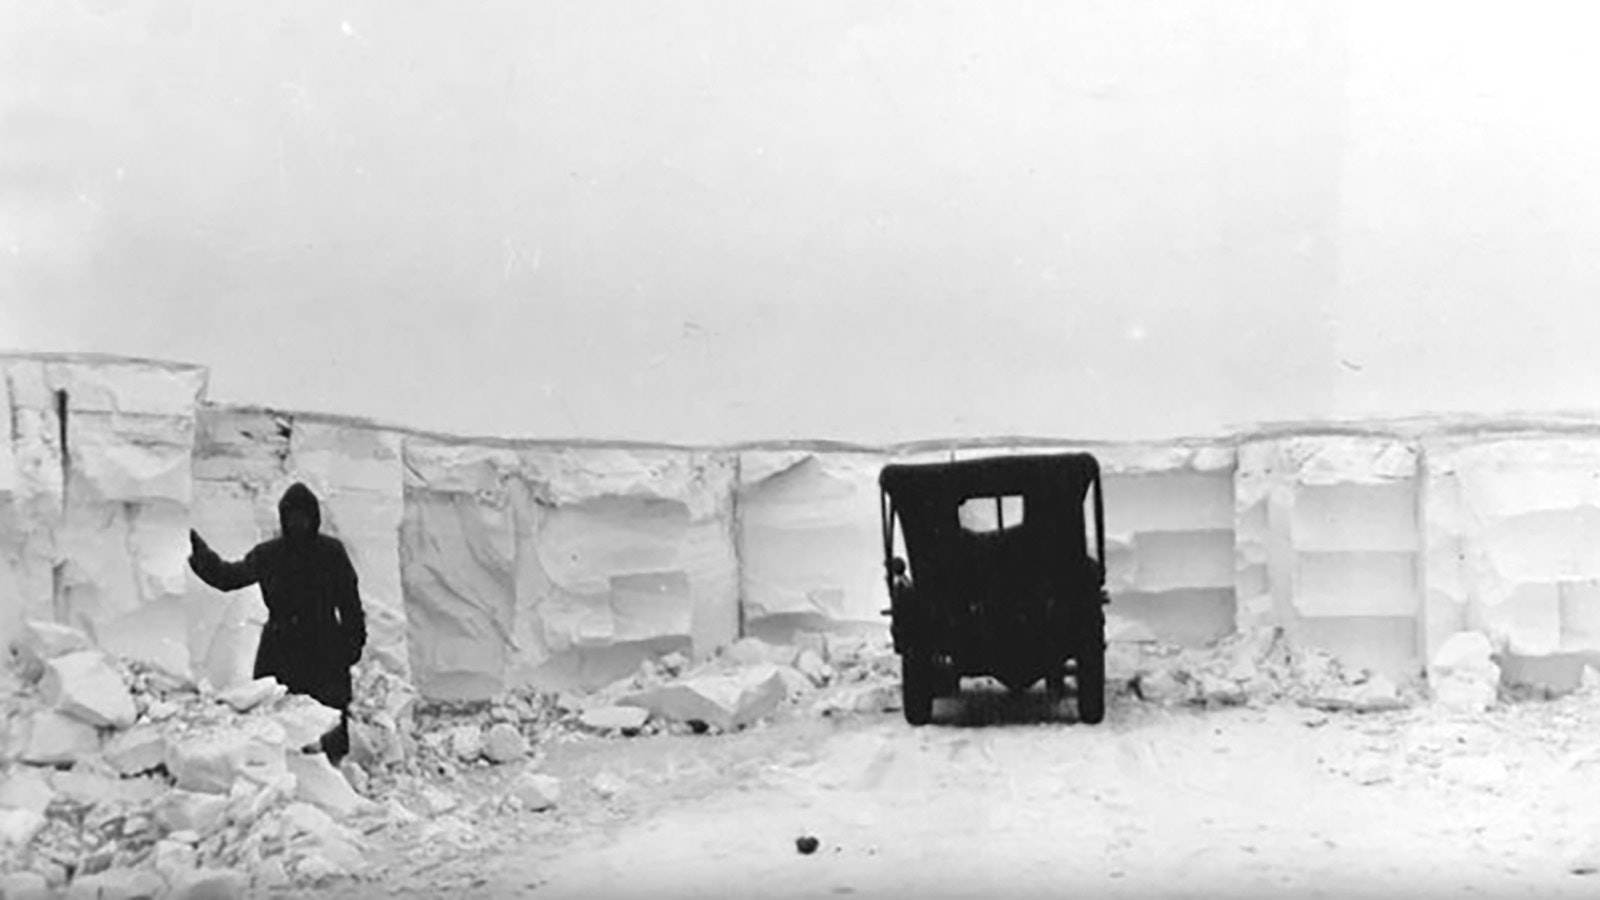 Shoveling out from the Blizzard of 1949 seemed an impossible task at some points.